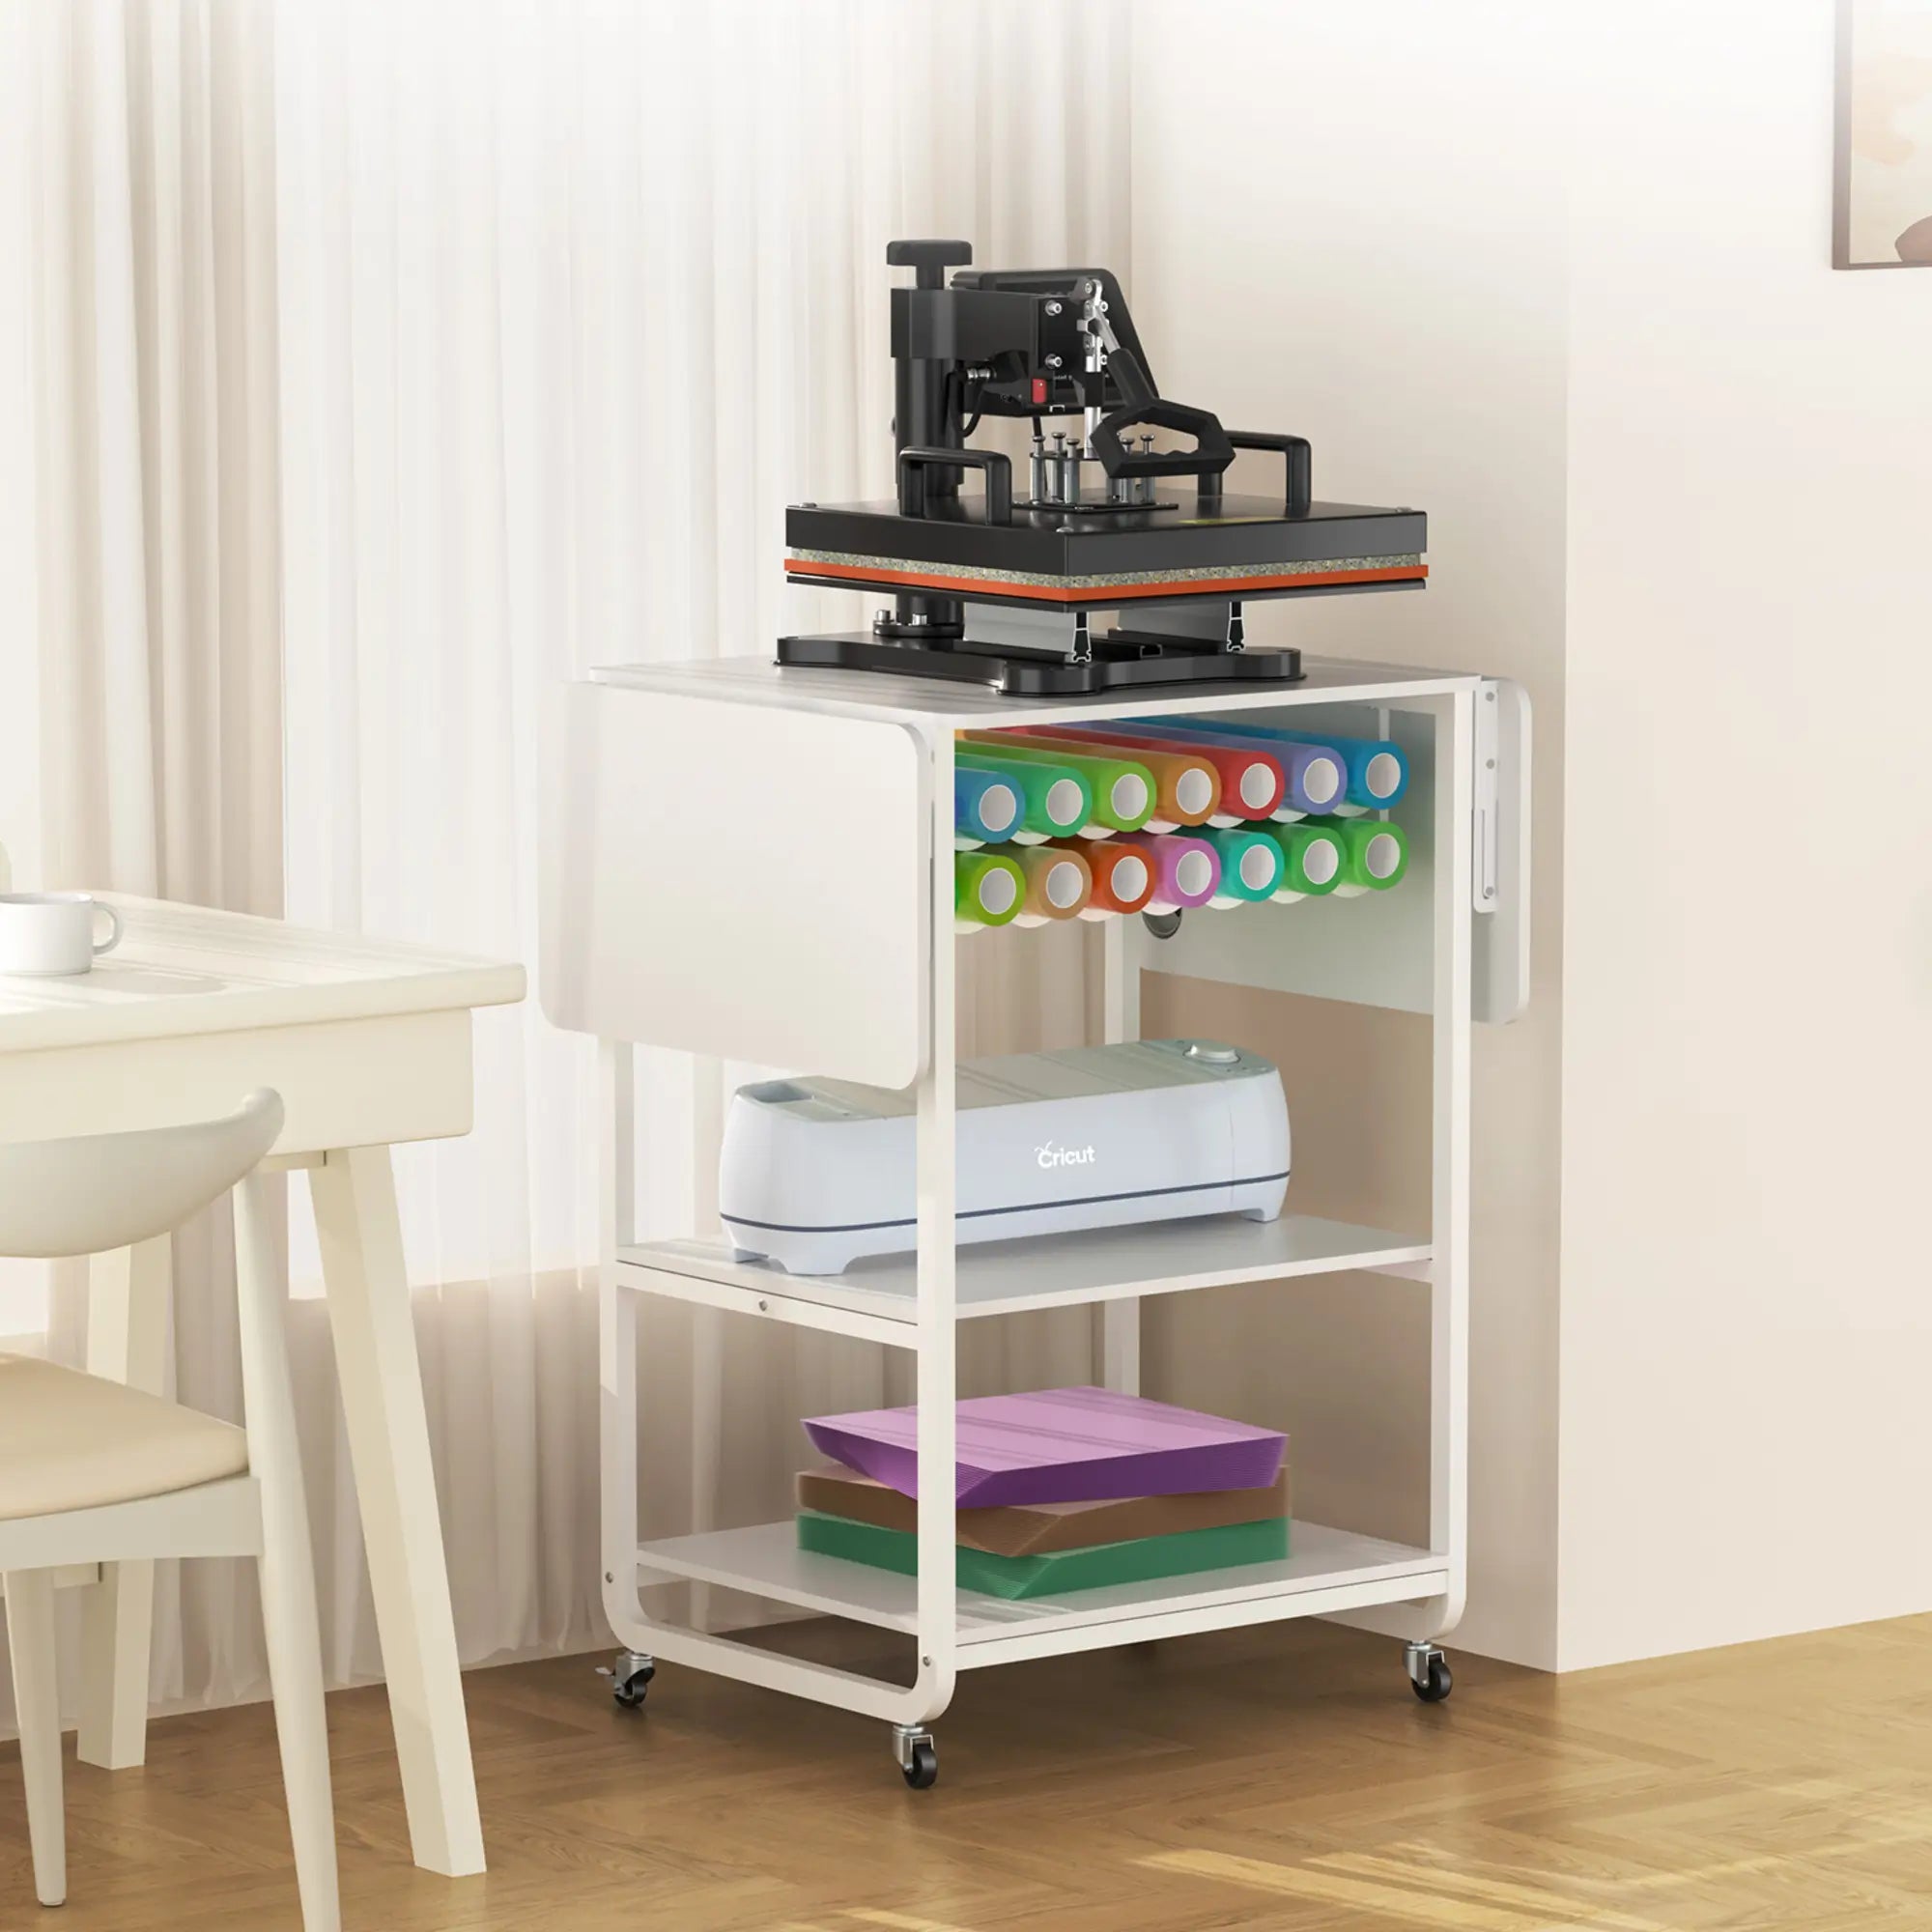 Crafit 3-Tier Rolling Craft Storage Workbench with Foldable Sides for Heat Press